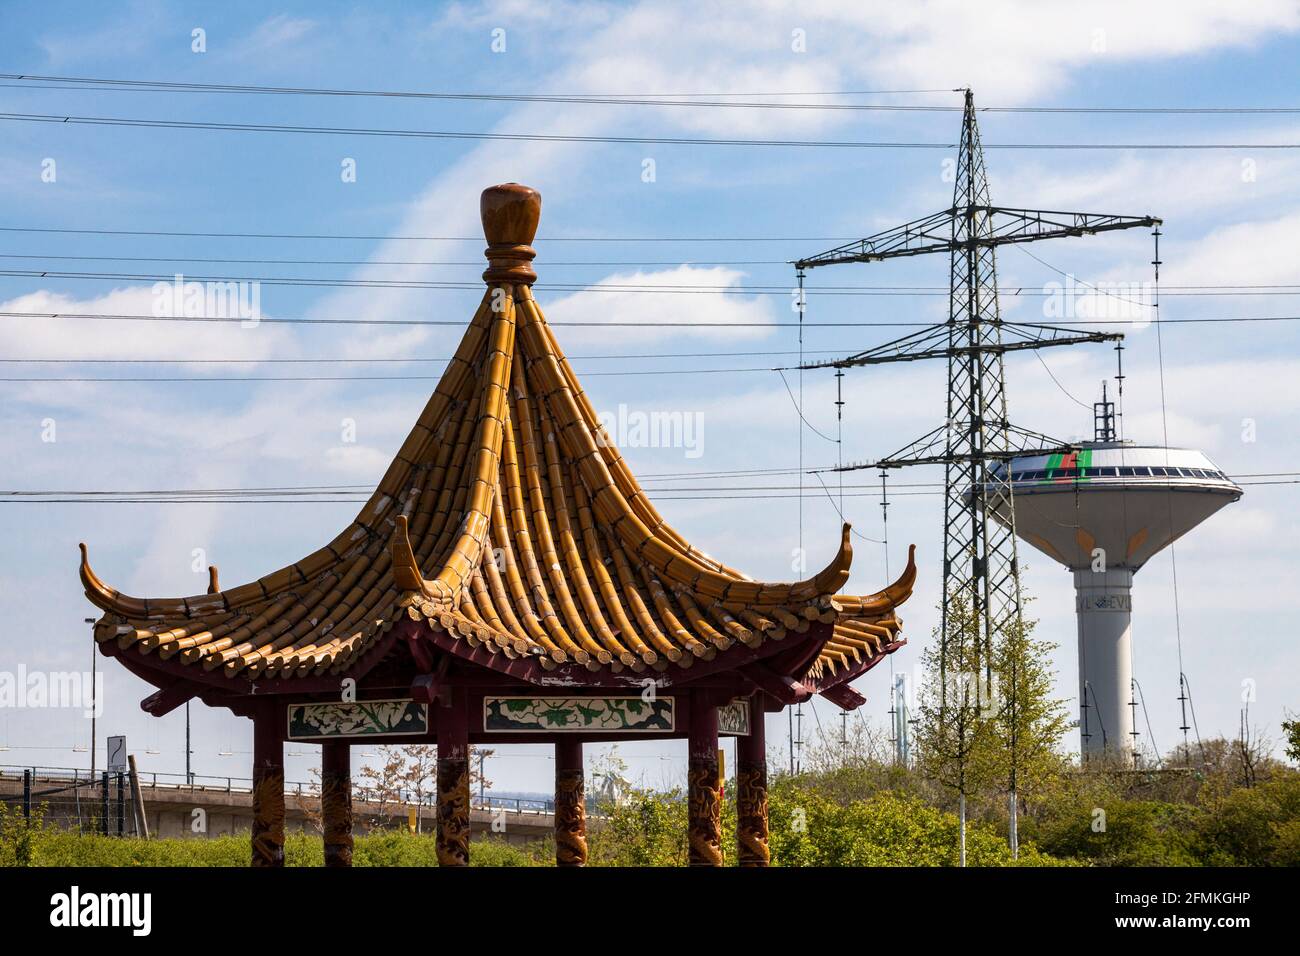 Chinese Dragon Pavilion in the Neuland Park, in the background the water tower of Energieversorgung Leverkusen (energy supply Leverkusen ) and a high- Stock Photo